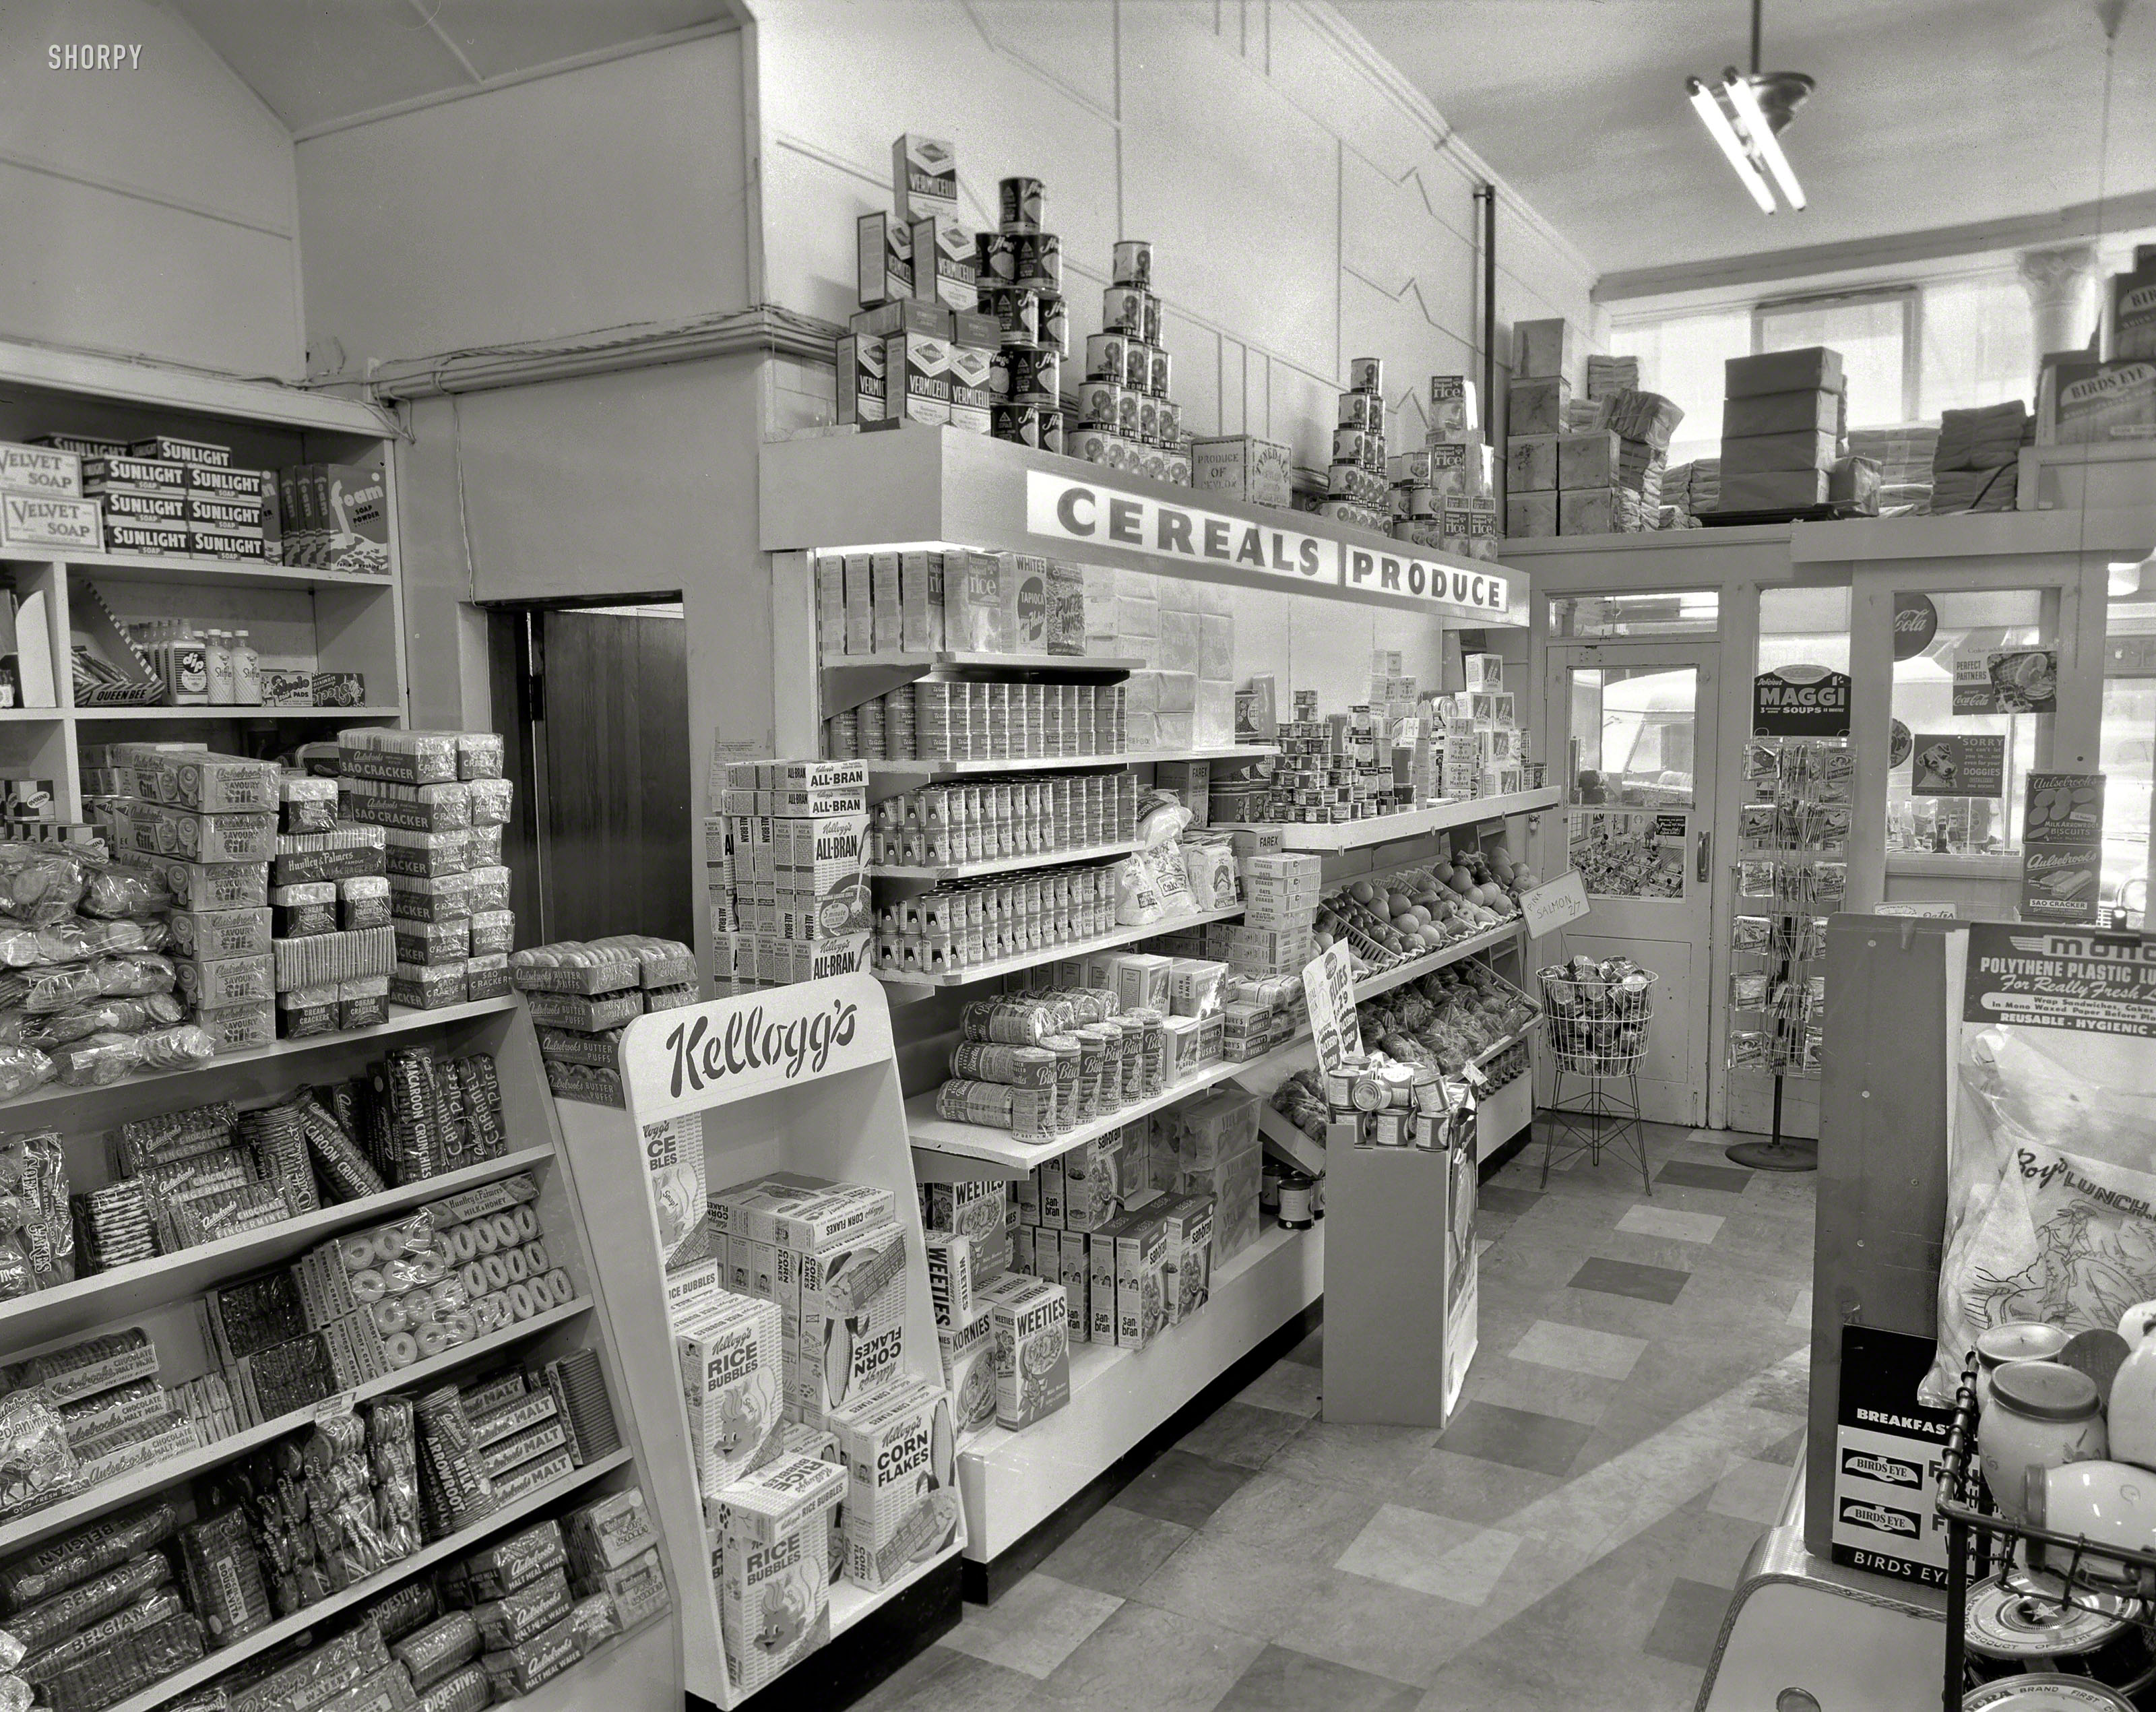 New Zealand circa 1958. "U-Rect-It fittings in Hill Bros. grocery store." A peek through the grocery-wormhole into an alternate universe of "Weeties" and Kellogg's "Rice Bubbles." Photo by K.E. Niven & Co., Wellington. View full size.